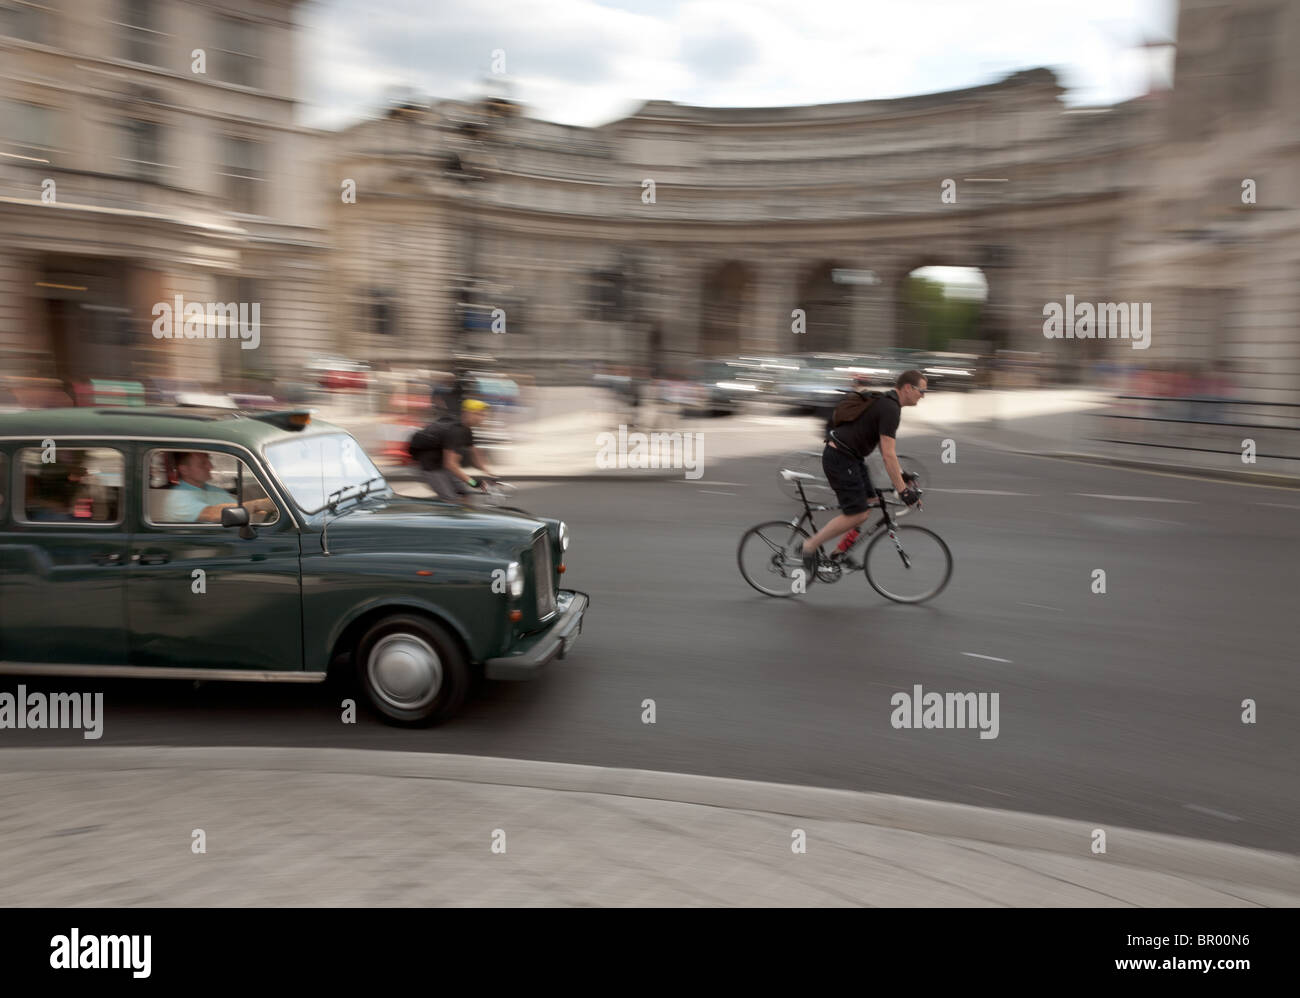 Cyclist and taxi in Trafalgar Square, London Stock Photo